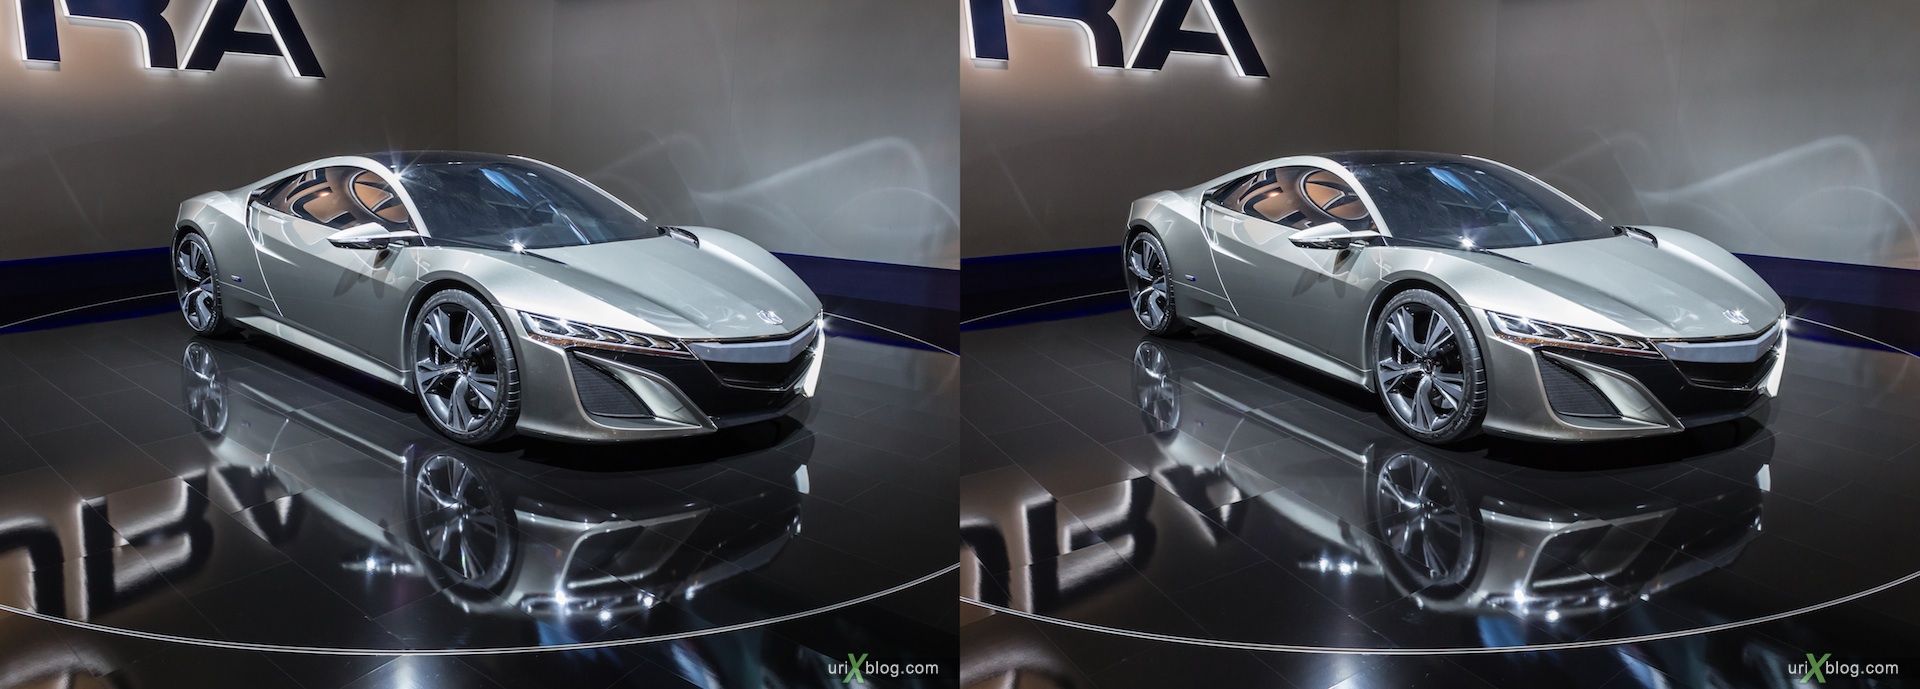 2012, Moscow International Automobile Salon, auto show, 3D, stereo pair, cross-eyed, crossview